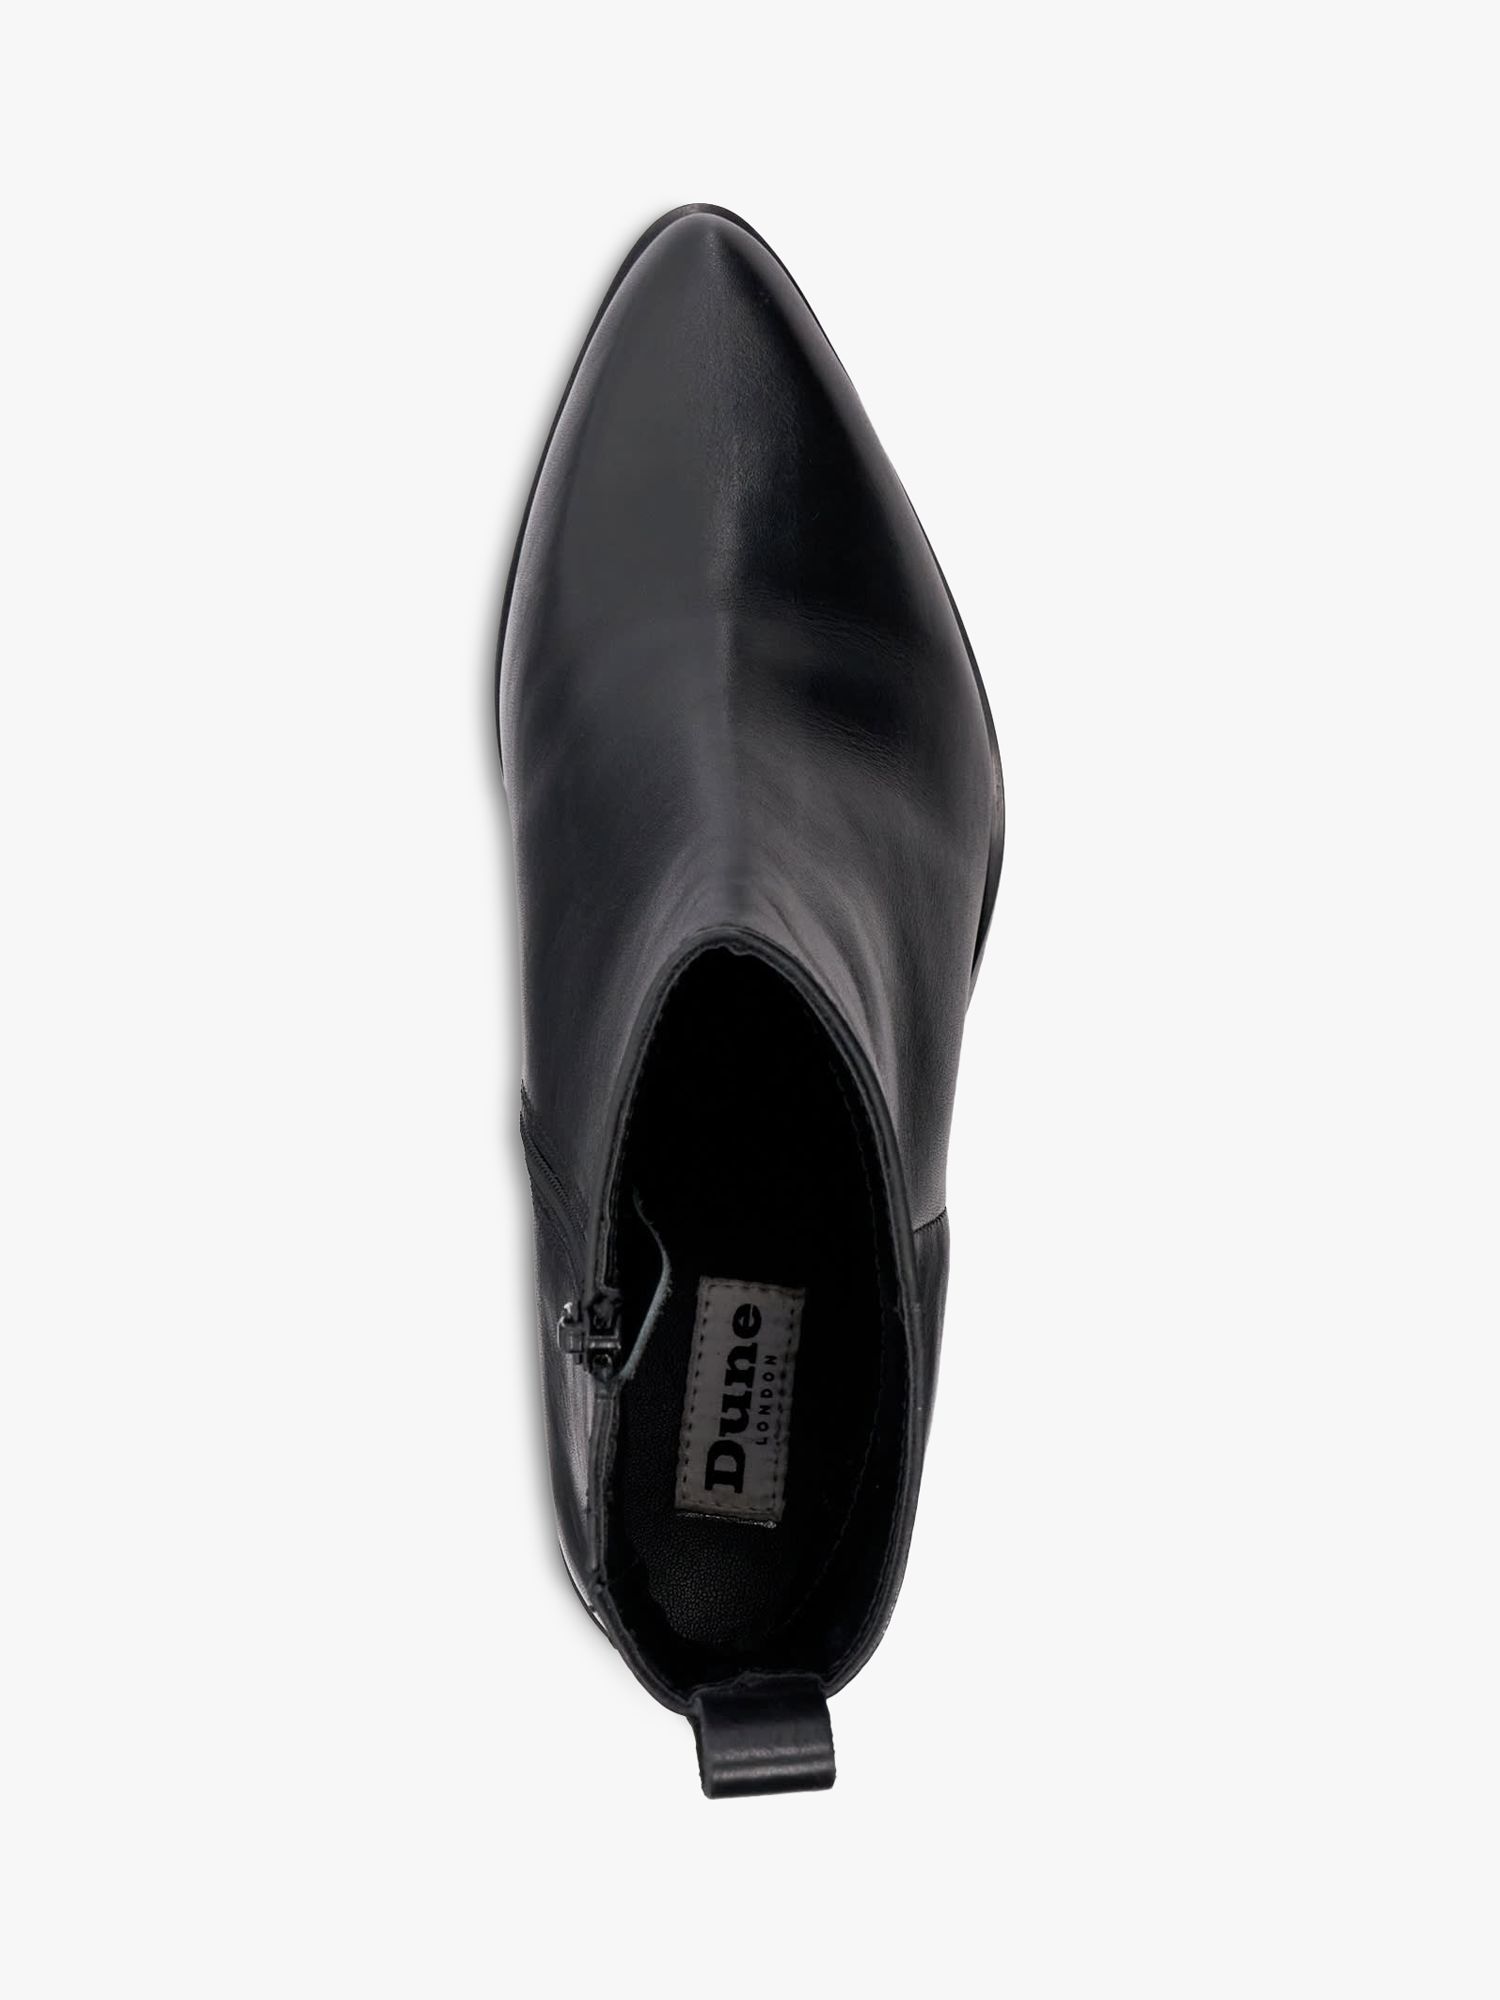 Dune Papz Leather Ankle Boots, Black-leather at John Lewis & Partners